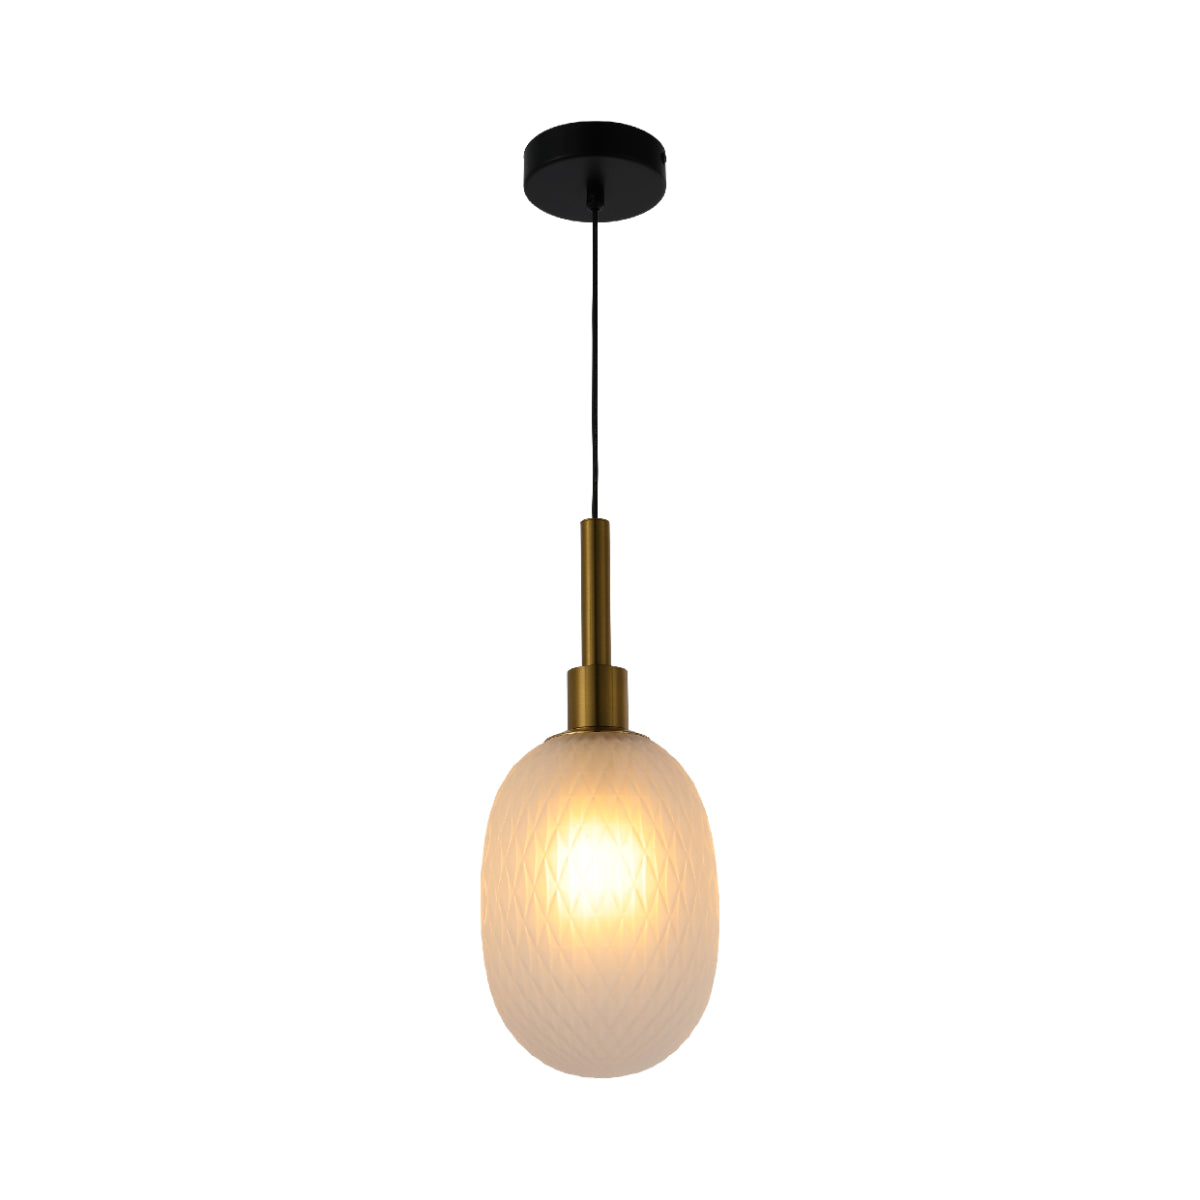 Main image of Opalescent Ellipsoid Pendant Light with Gold Detail 150-19022